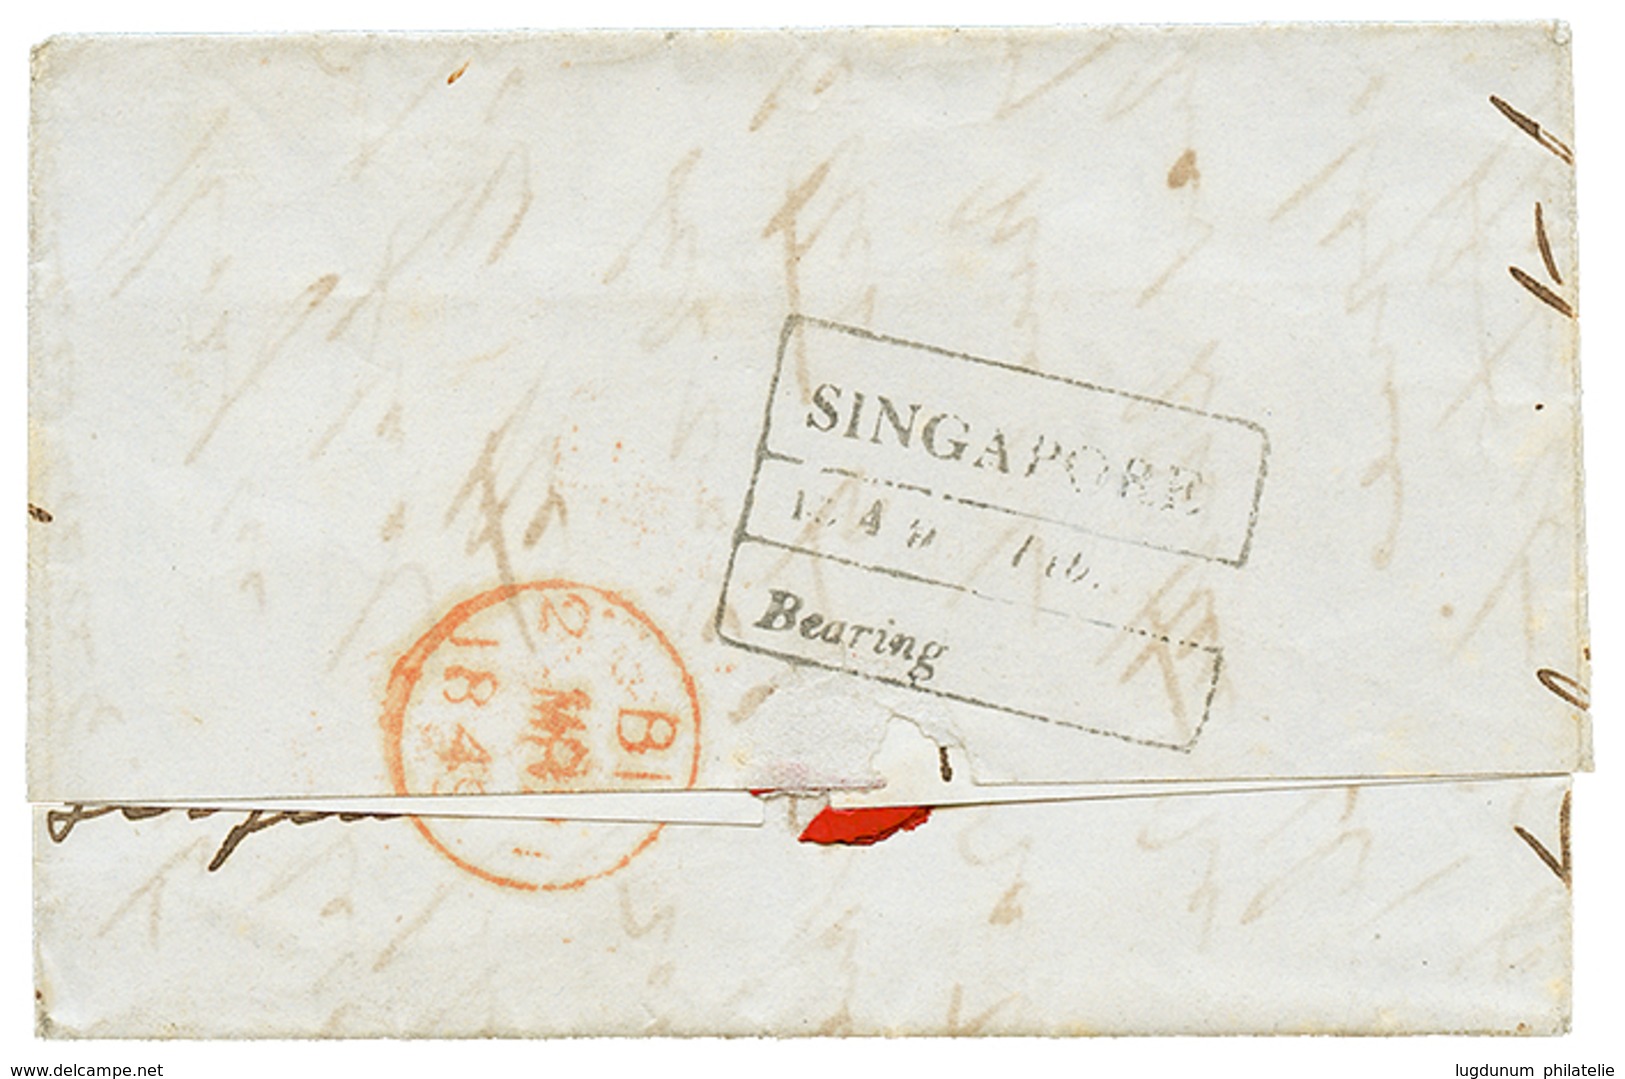 1340 1849 SINGAPORE/Bearing On Reverse Of Entire Letter To ENGLAND. Rare So Nice. Superb. - Singapore (...-1959)